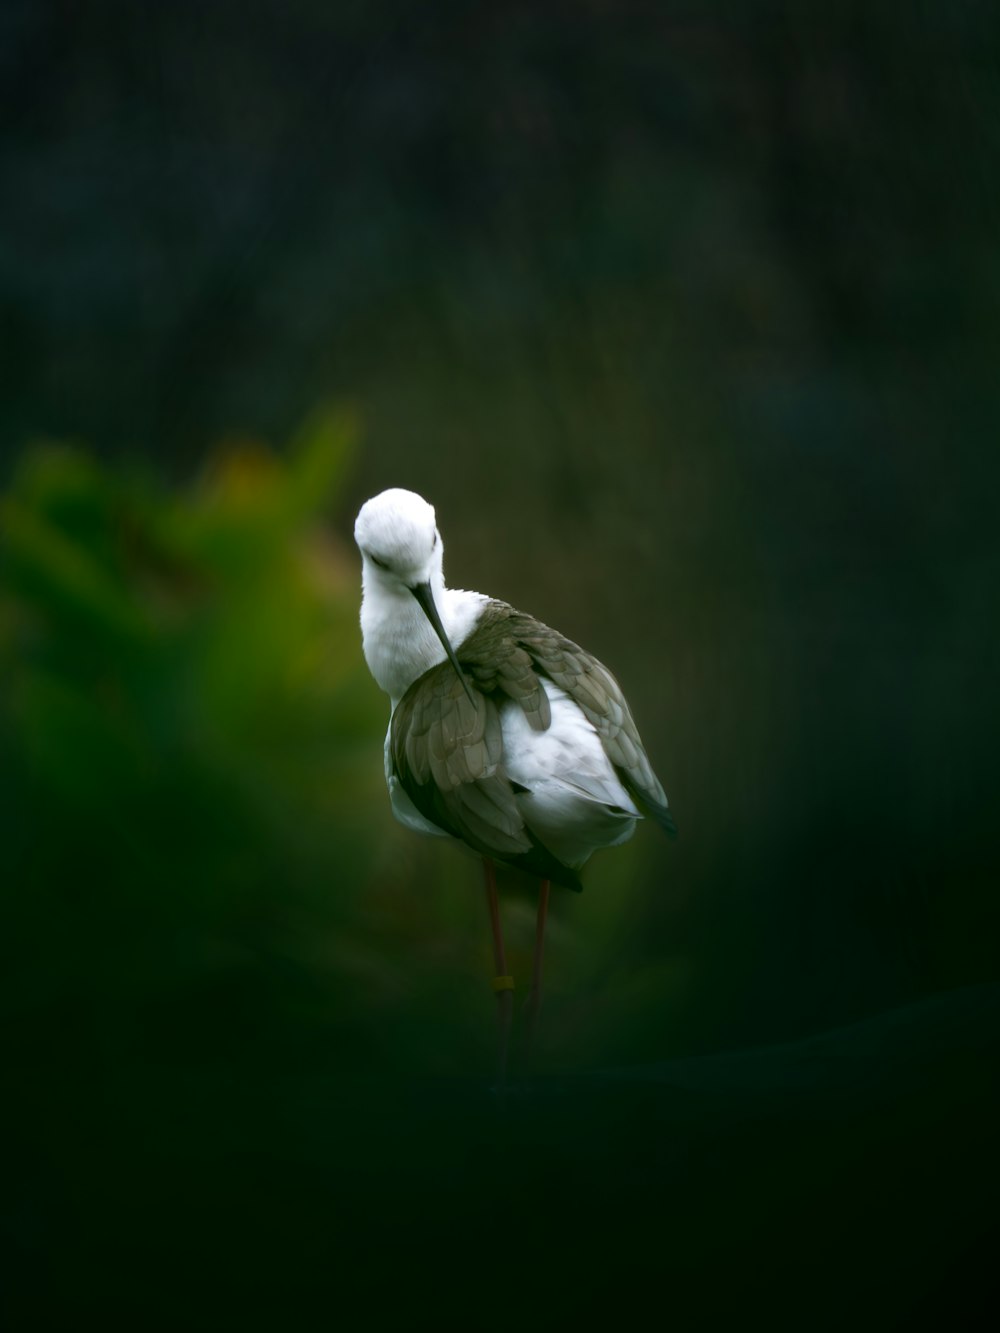 a white bird standing on top of a lush green field